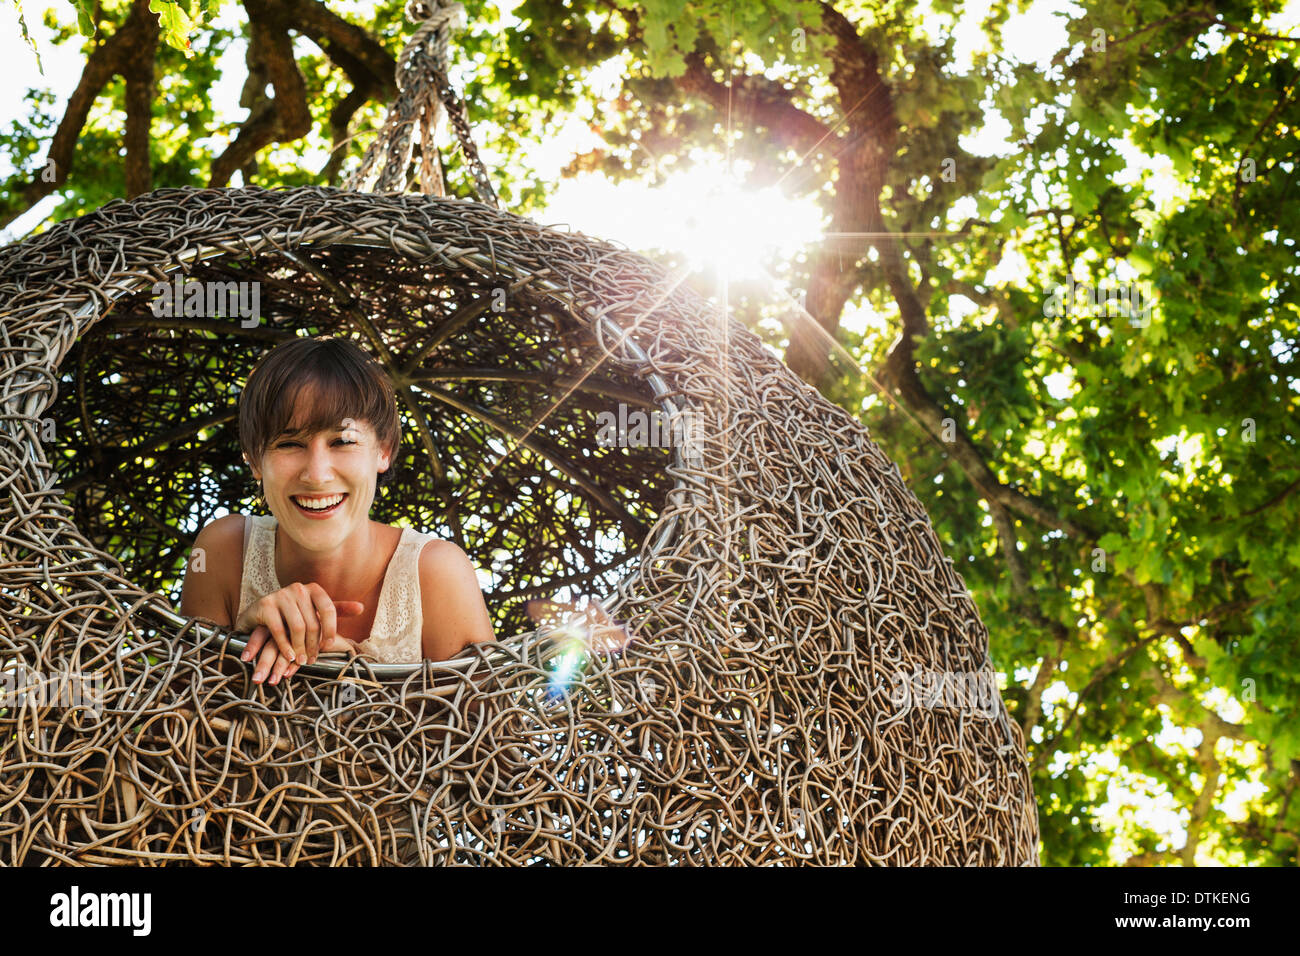 Woman smiling in nest tree house Stock Photo